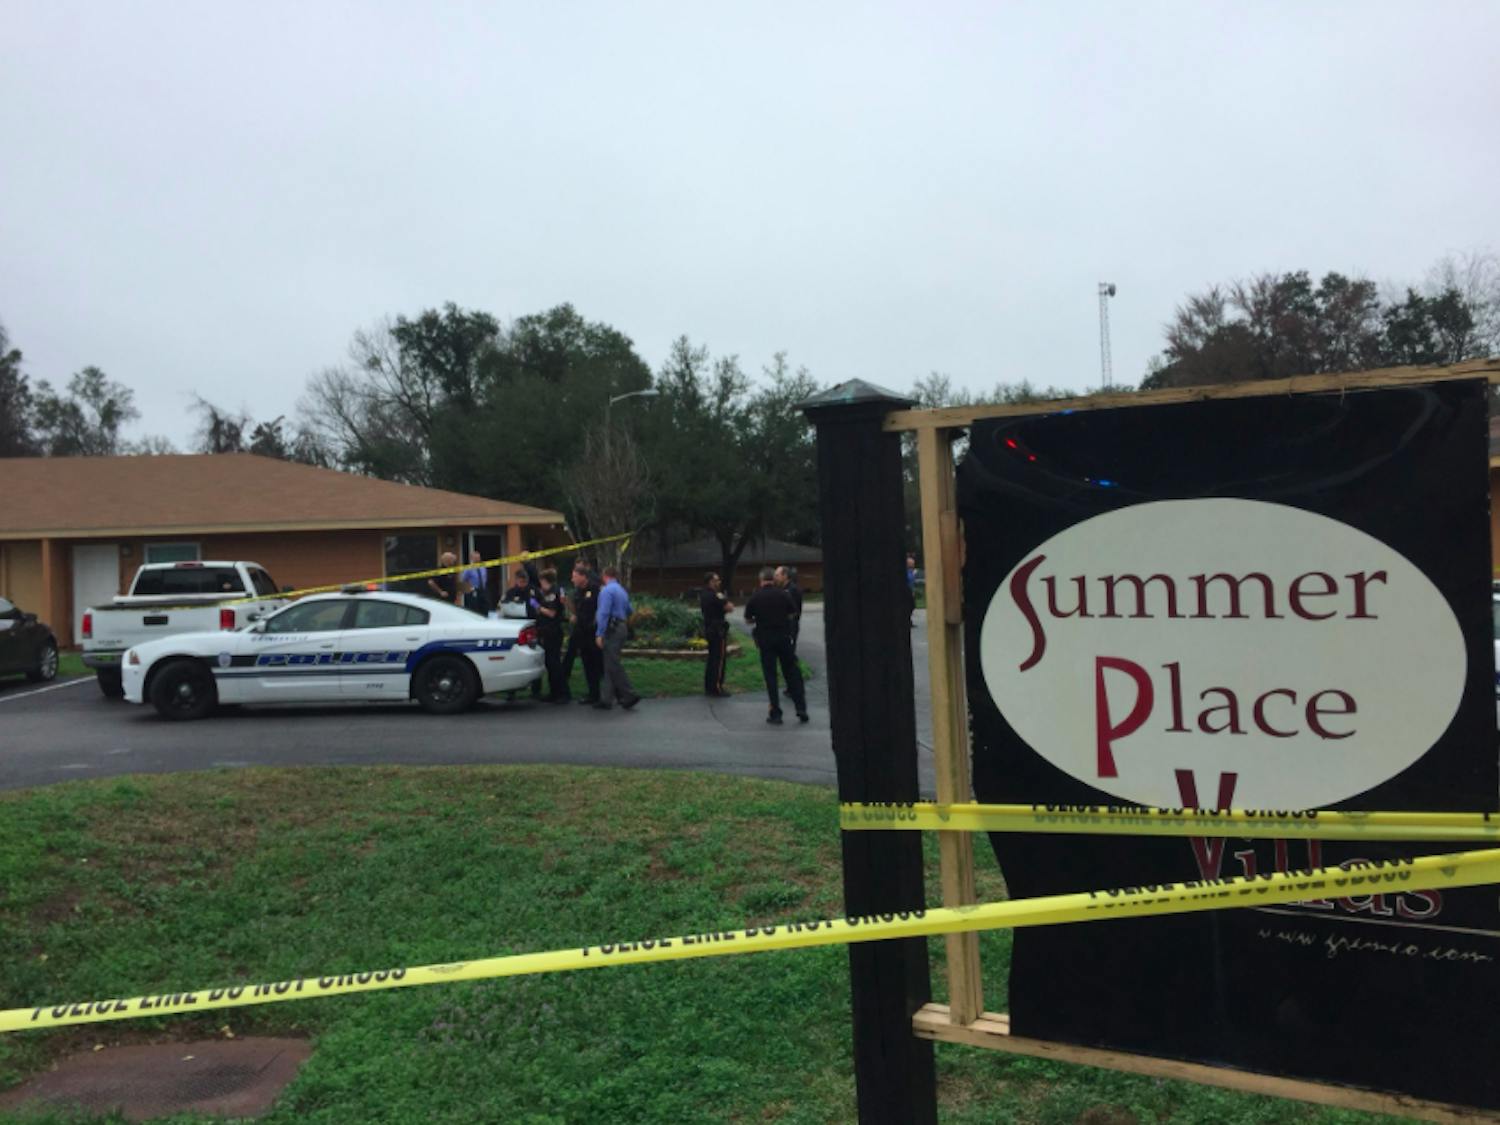 Summer place Apartments, located at 3361 SW 41 Place. Two people are dead after an apparent shooting.&nbsp;